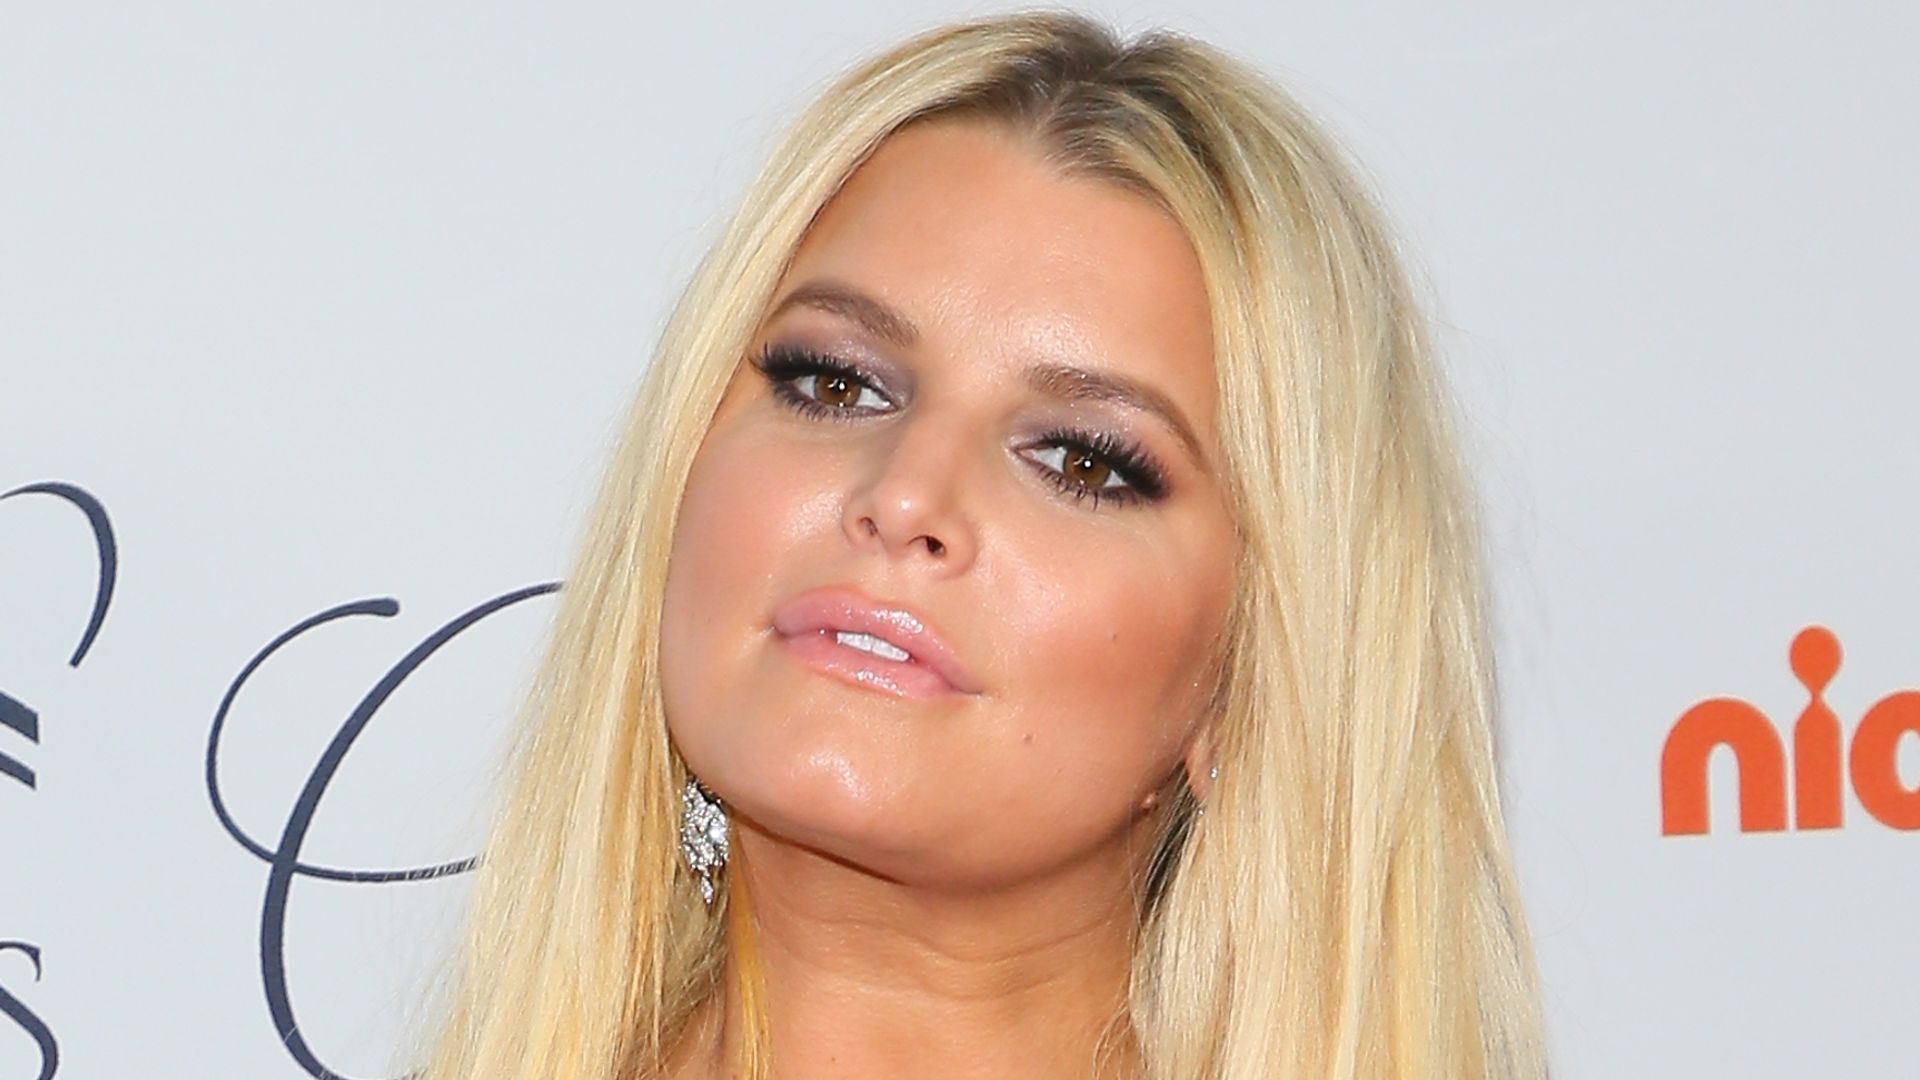 Jessica Simpson dresses her baby girl Maxwell in cute spotty